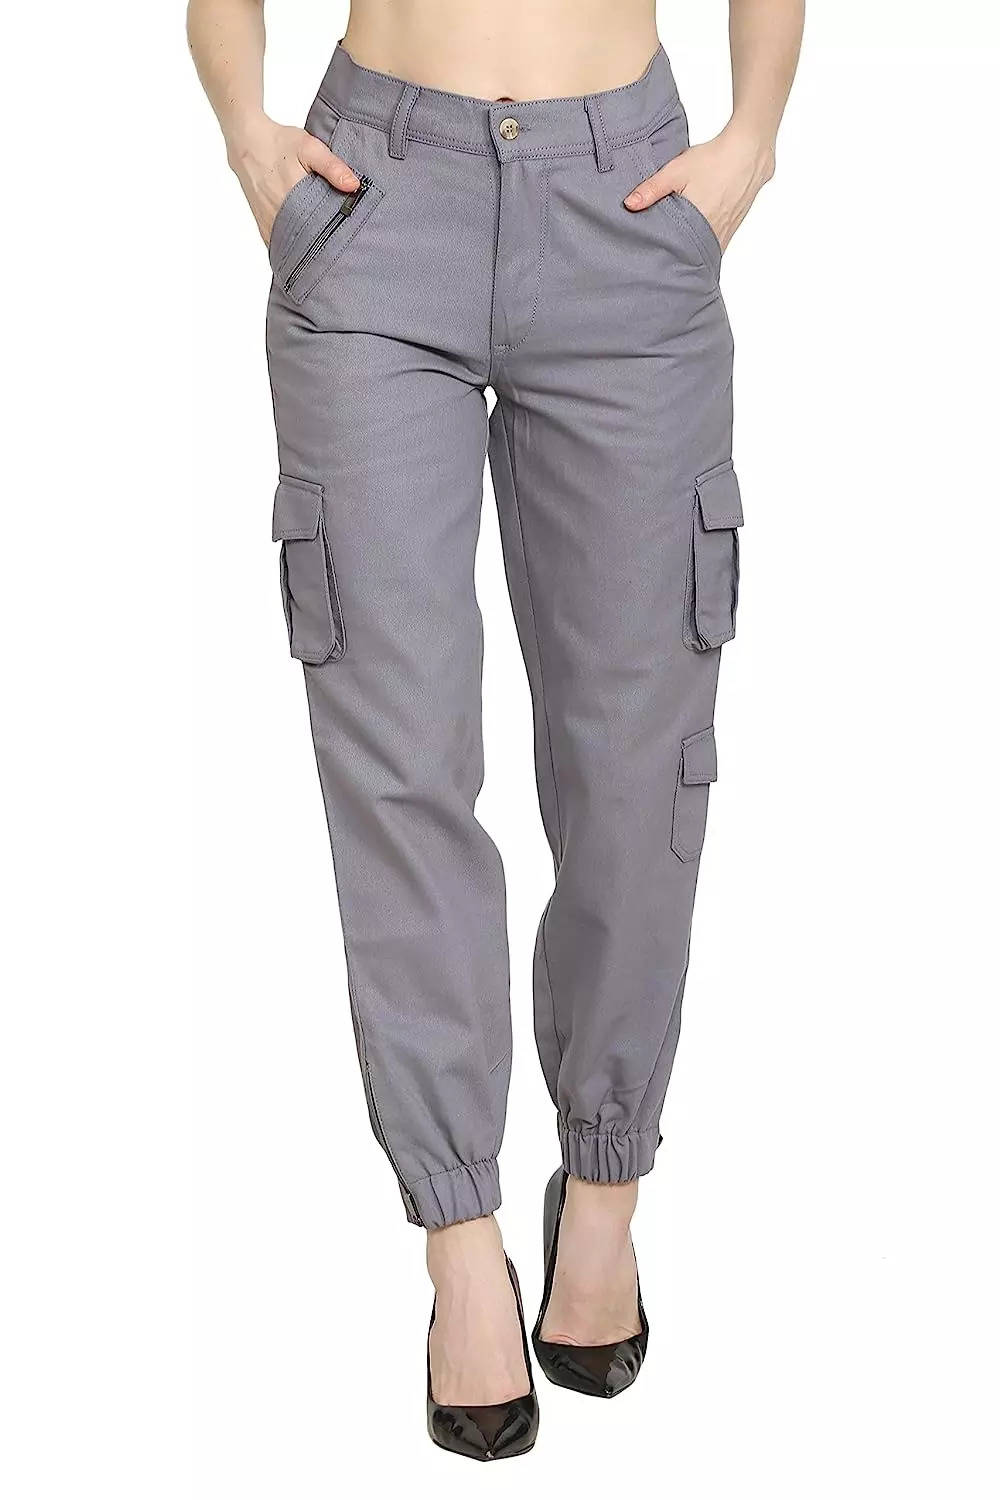 Womens Cargo Pants Elastic Ankles | Womens Cargo Pants Elastic Waist - Women  Elastic - Aliexpress